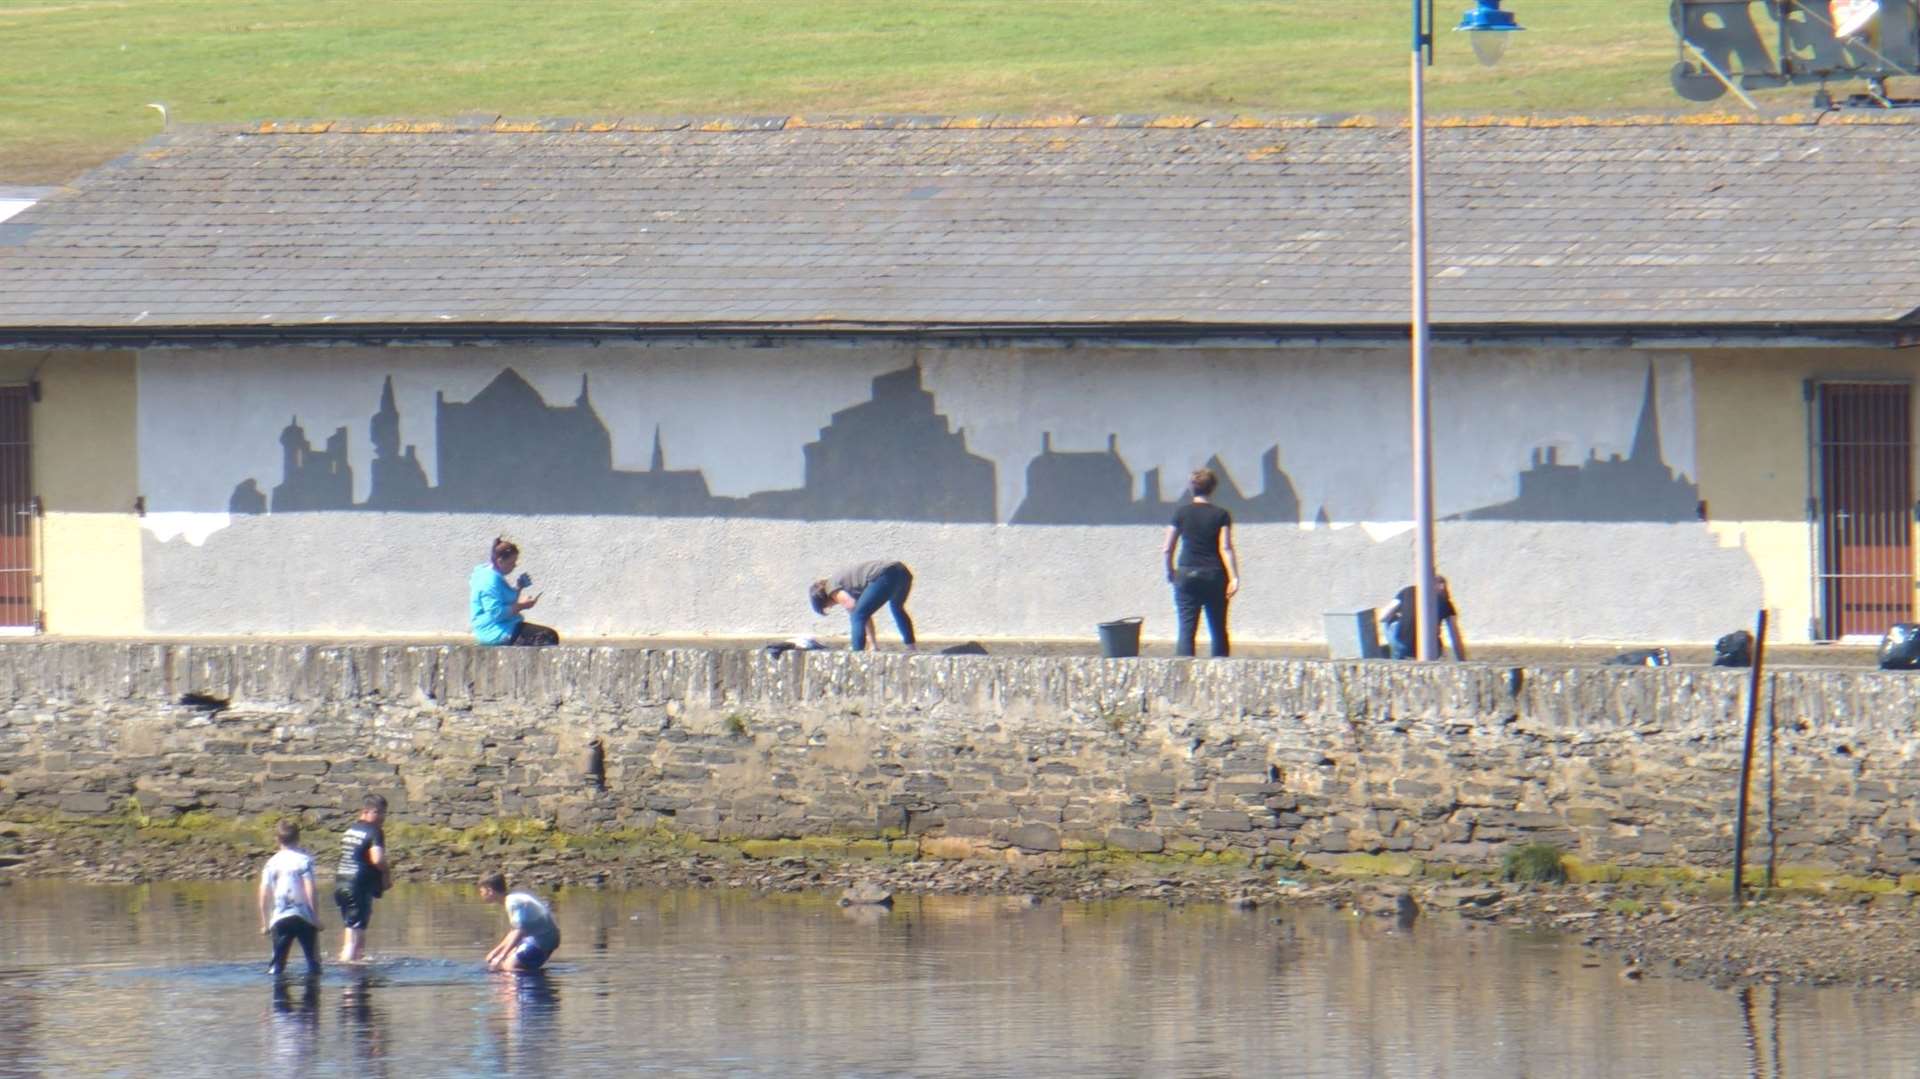 The first stage of the mural was completed while Wick basked in soaring temperatures on Tuesday.